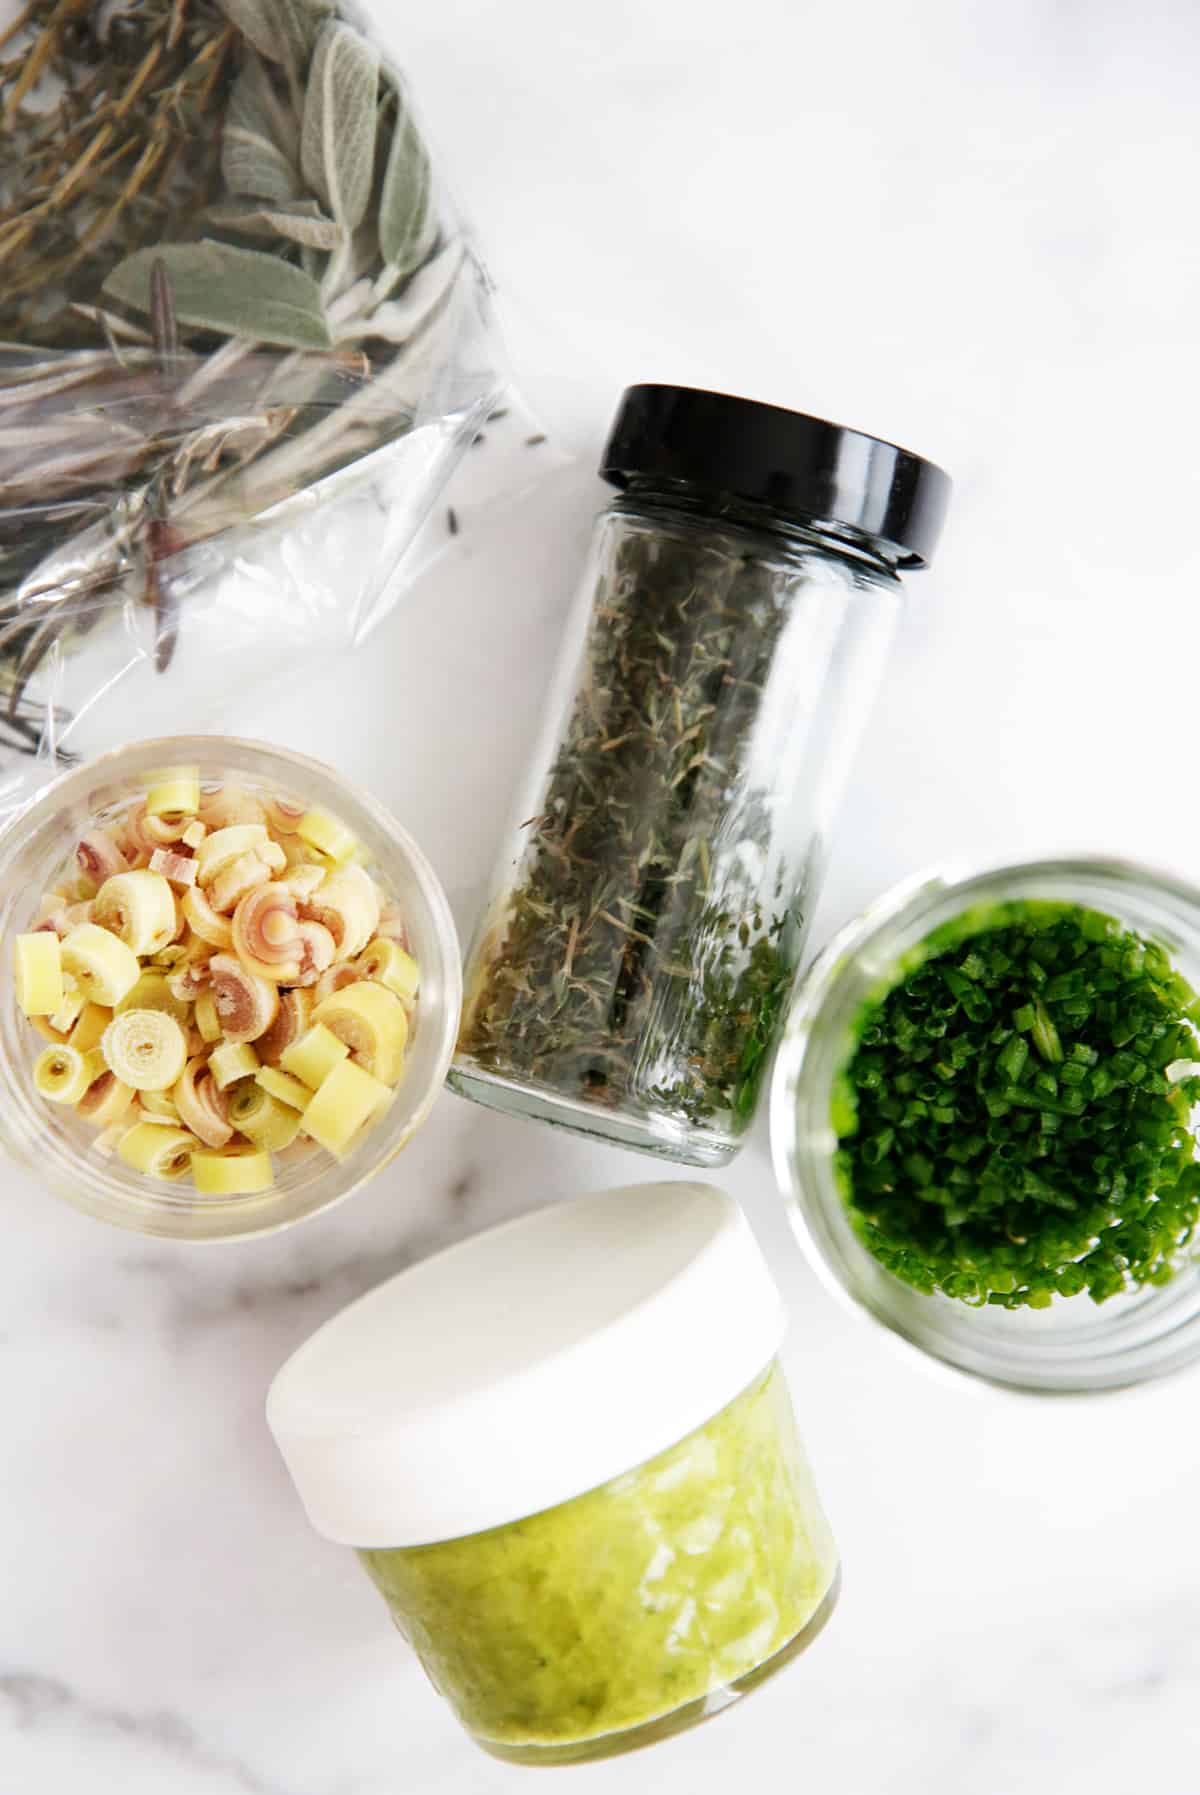 How to Preserve Fresh Herbs in the Freezer